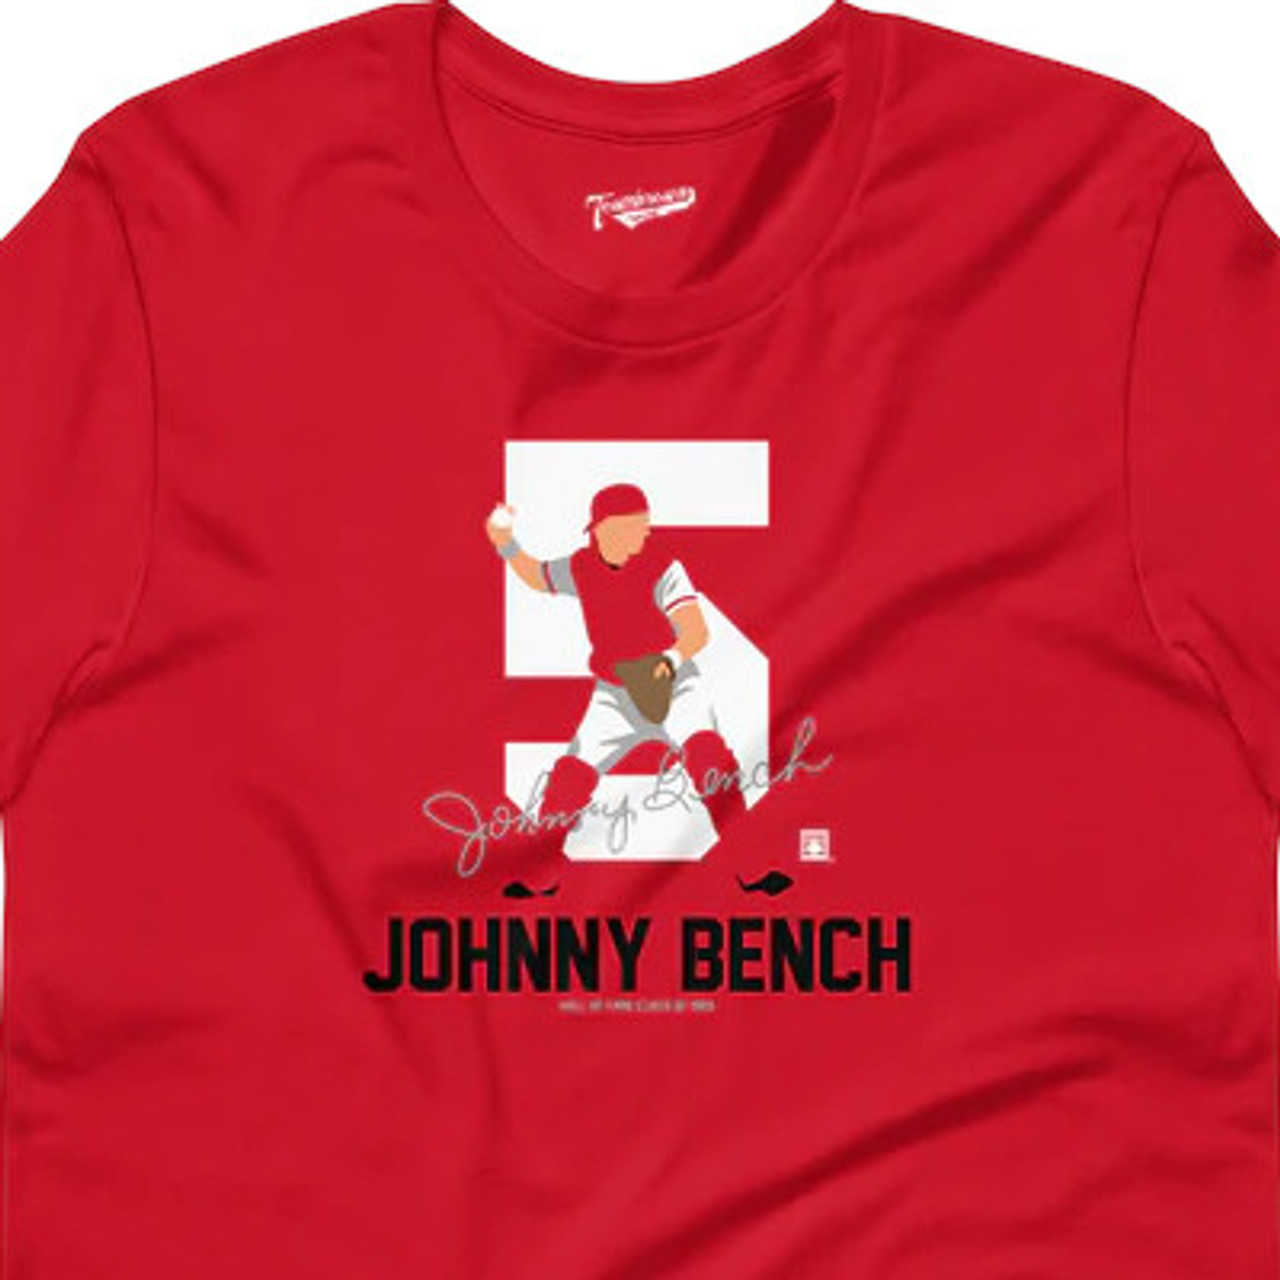 Teambrown Johnny T- Baseball Hall Fame Member Men\'s Shirt of Signature Red Bench